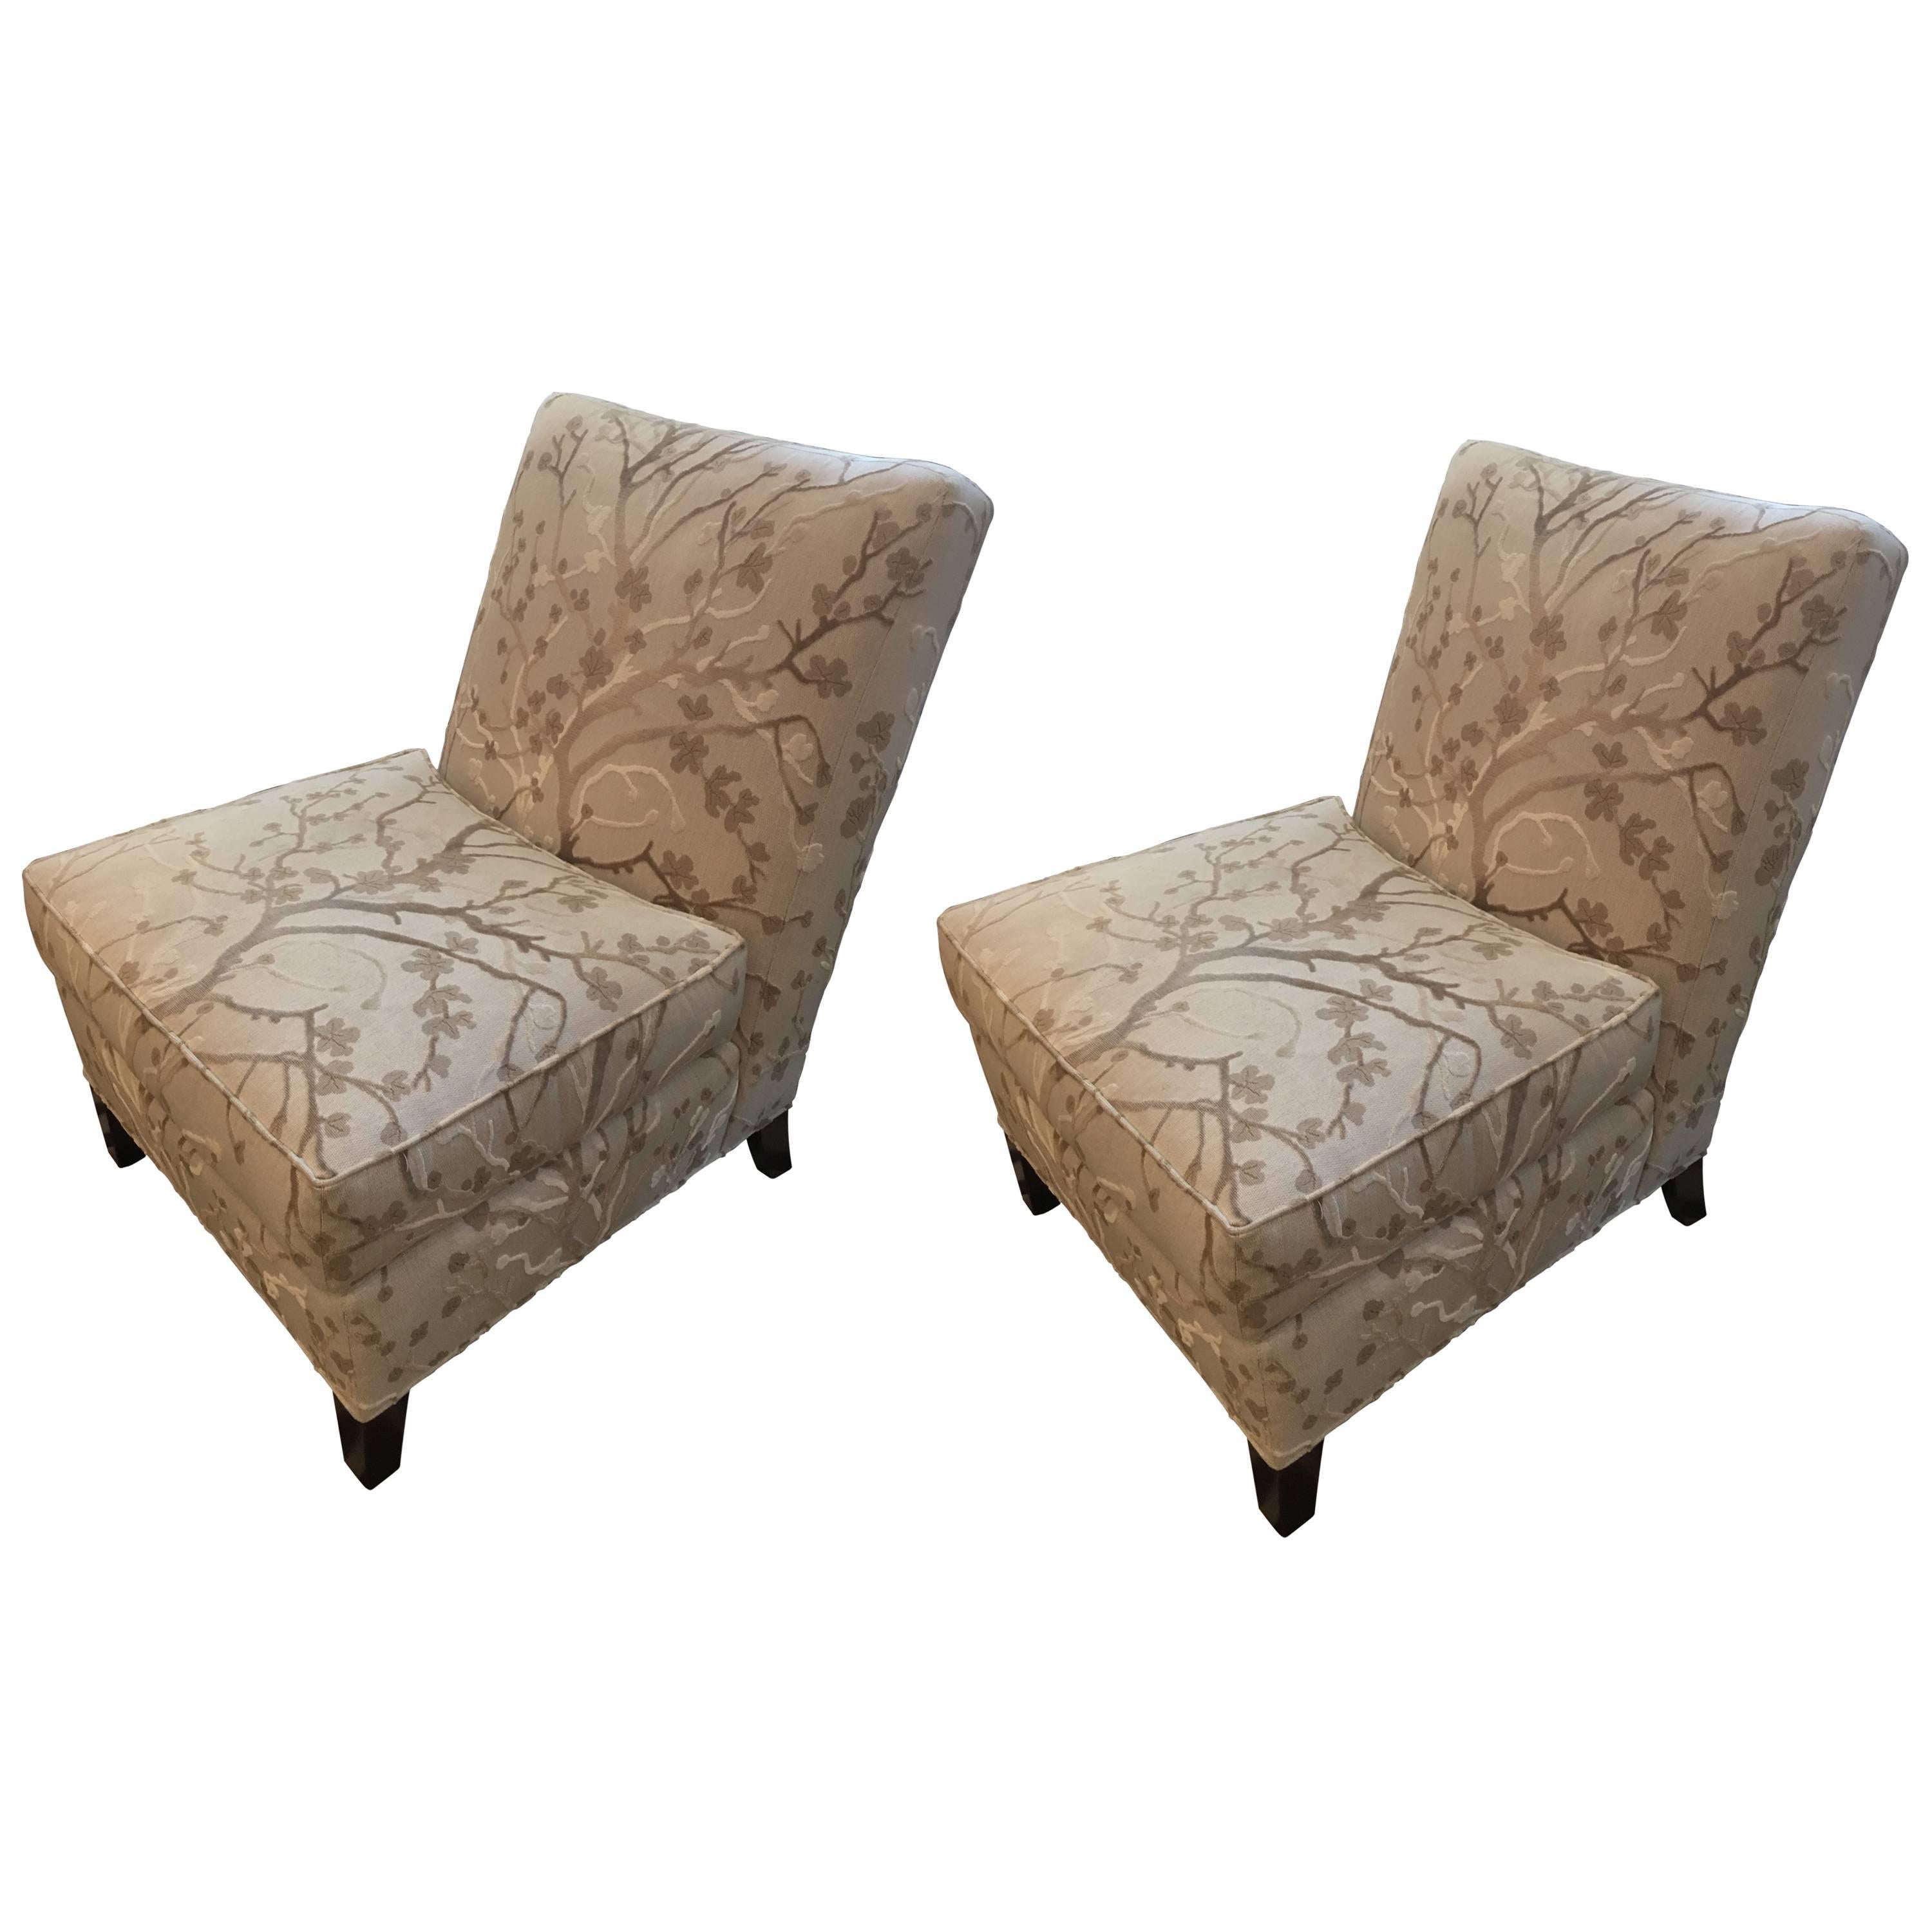 Sophisticated Pair of Slipper Chairs